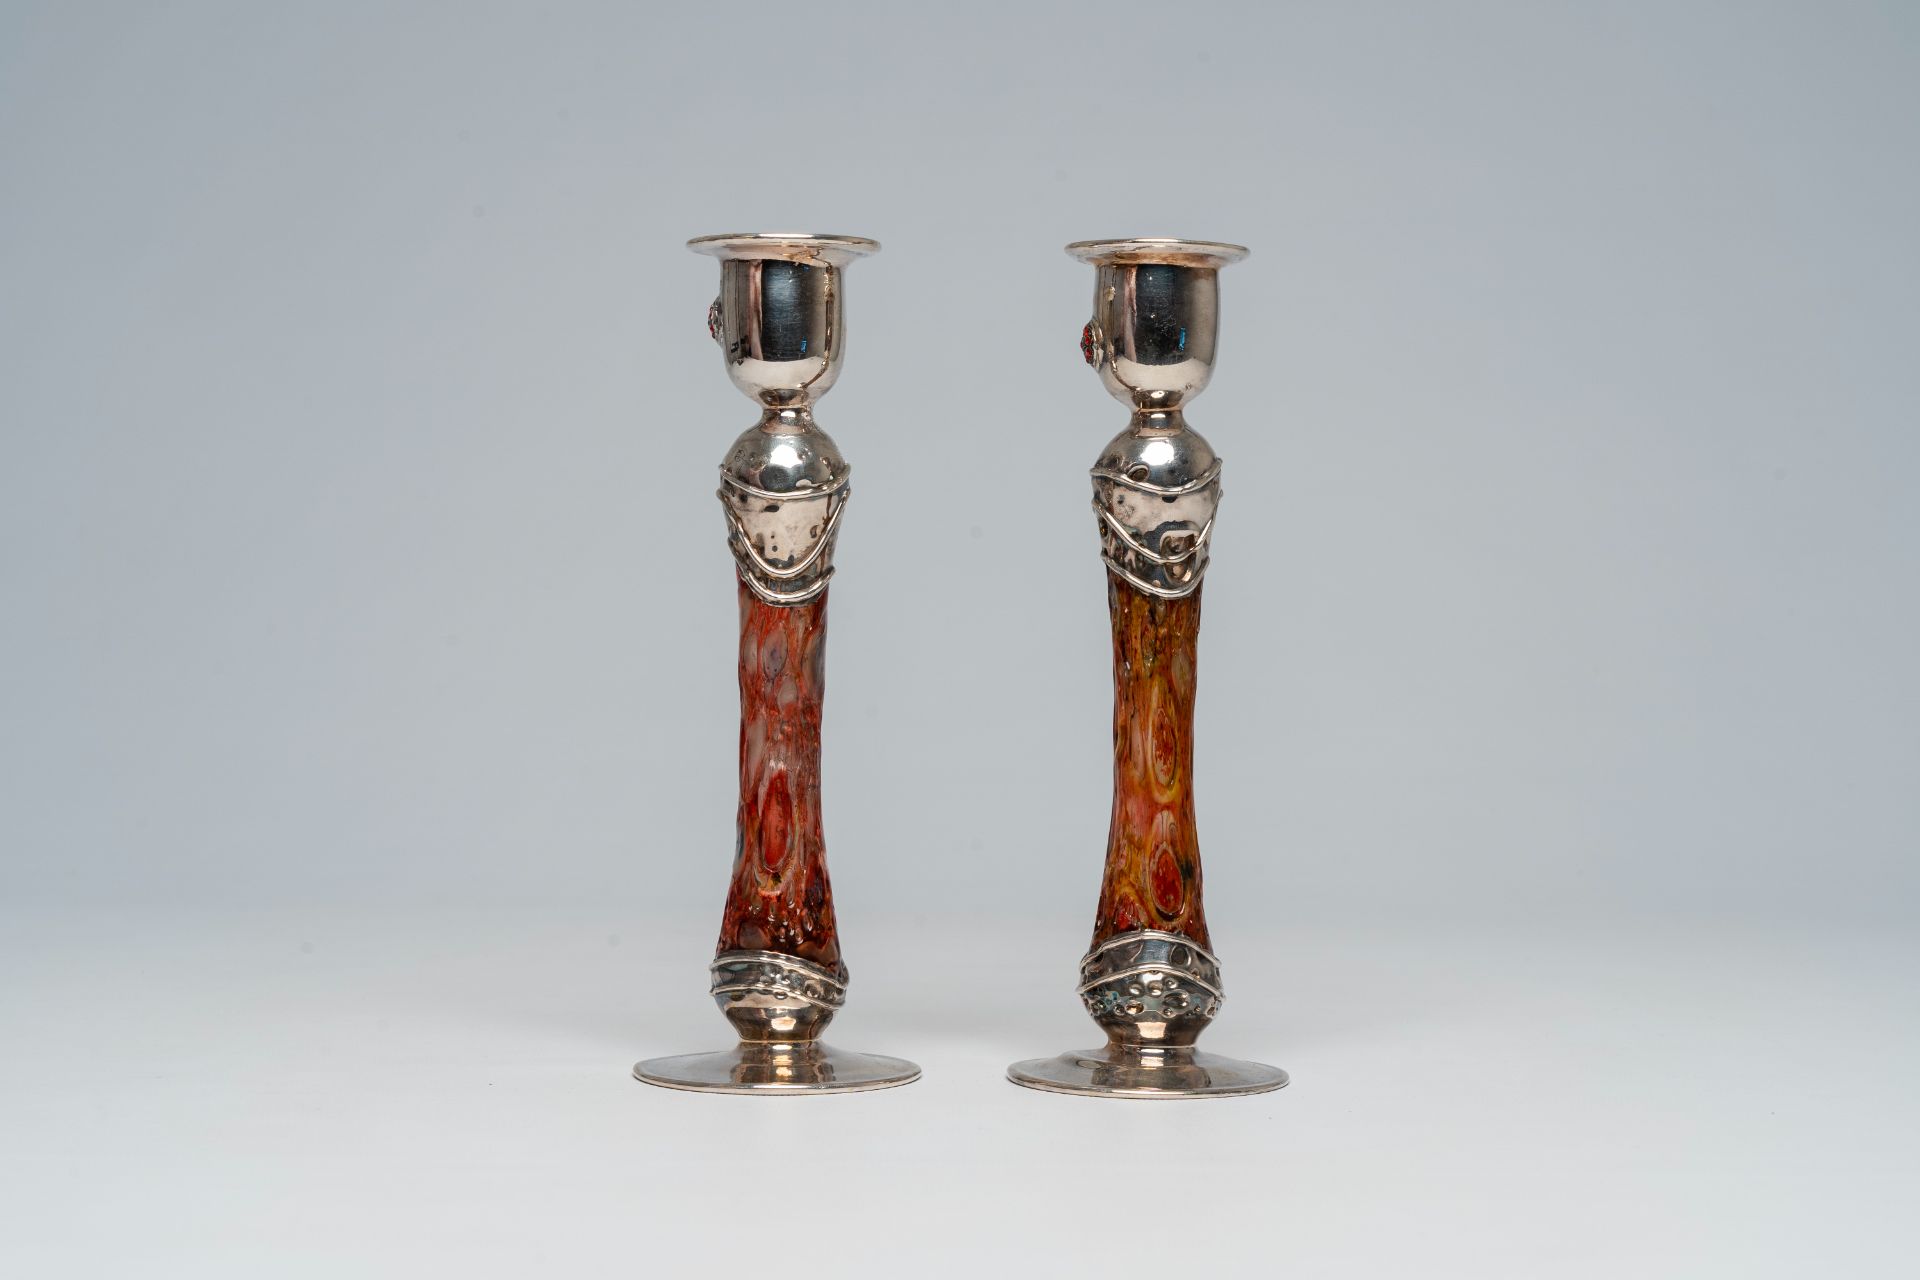 A pair of English or Scottish Arts & Crafts style silver and glass candlesticks, 20th C. - Image 3 of 11